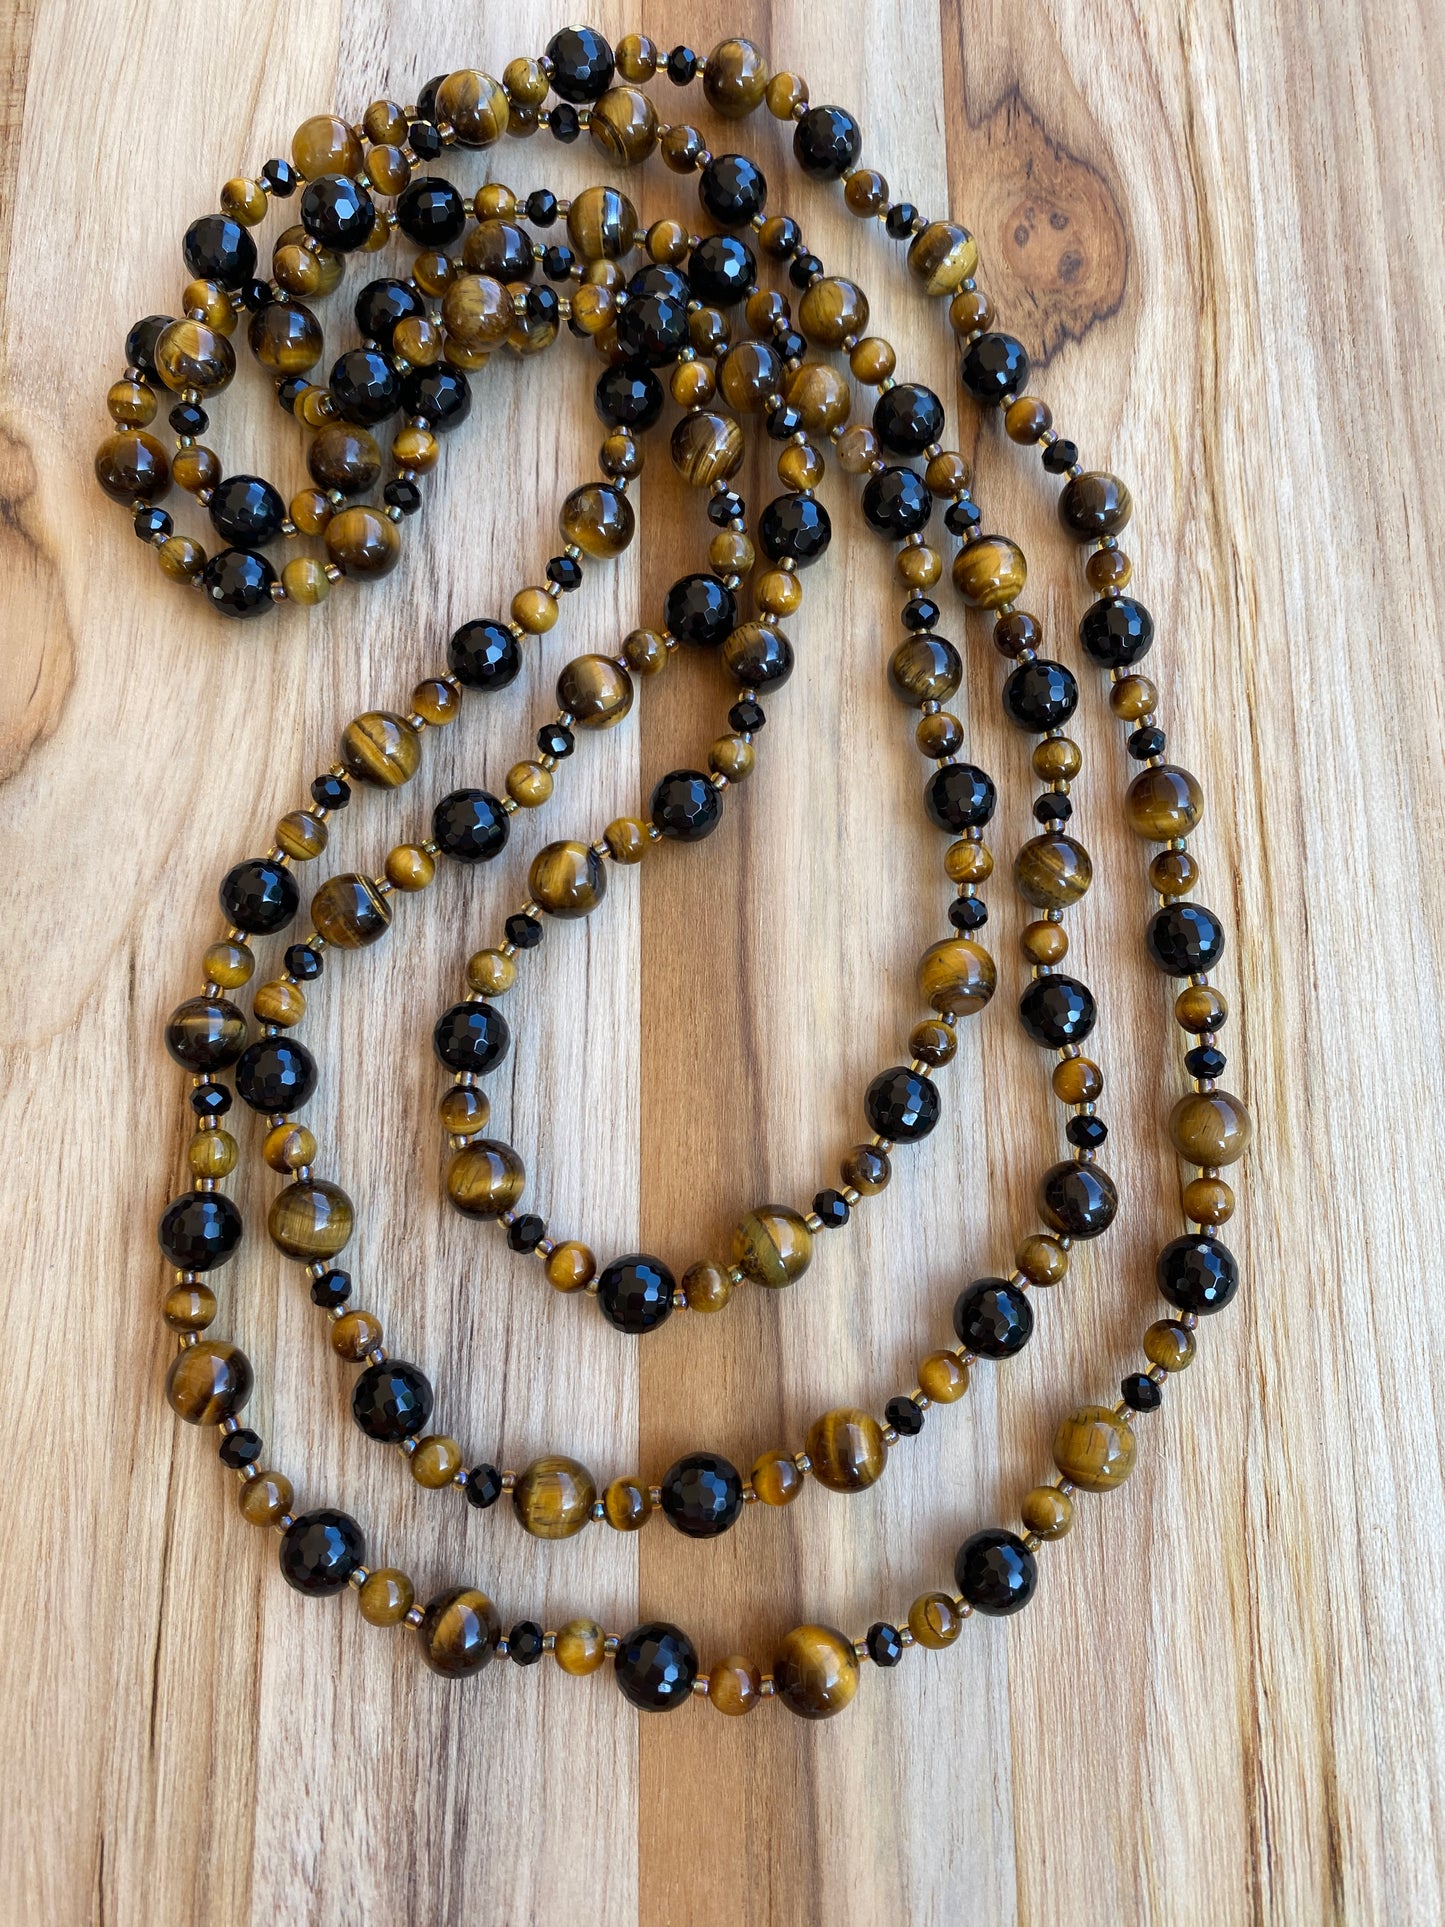 60" Extra Long Wraparound Black Onyx and Tigereye Beaded Necklace with Crystal Beads